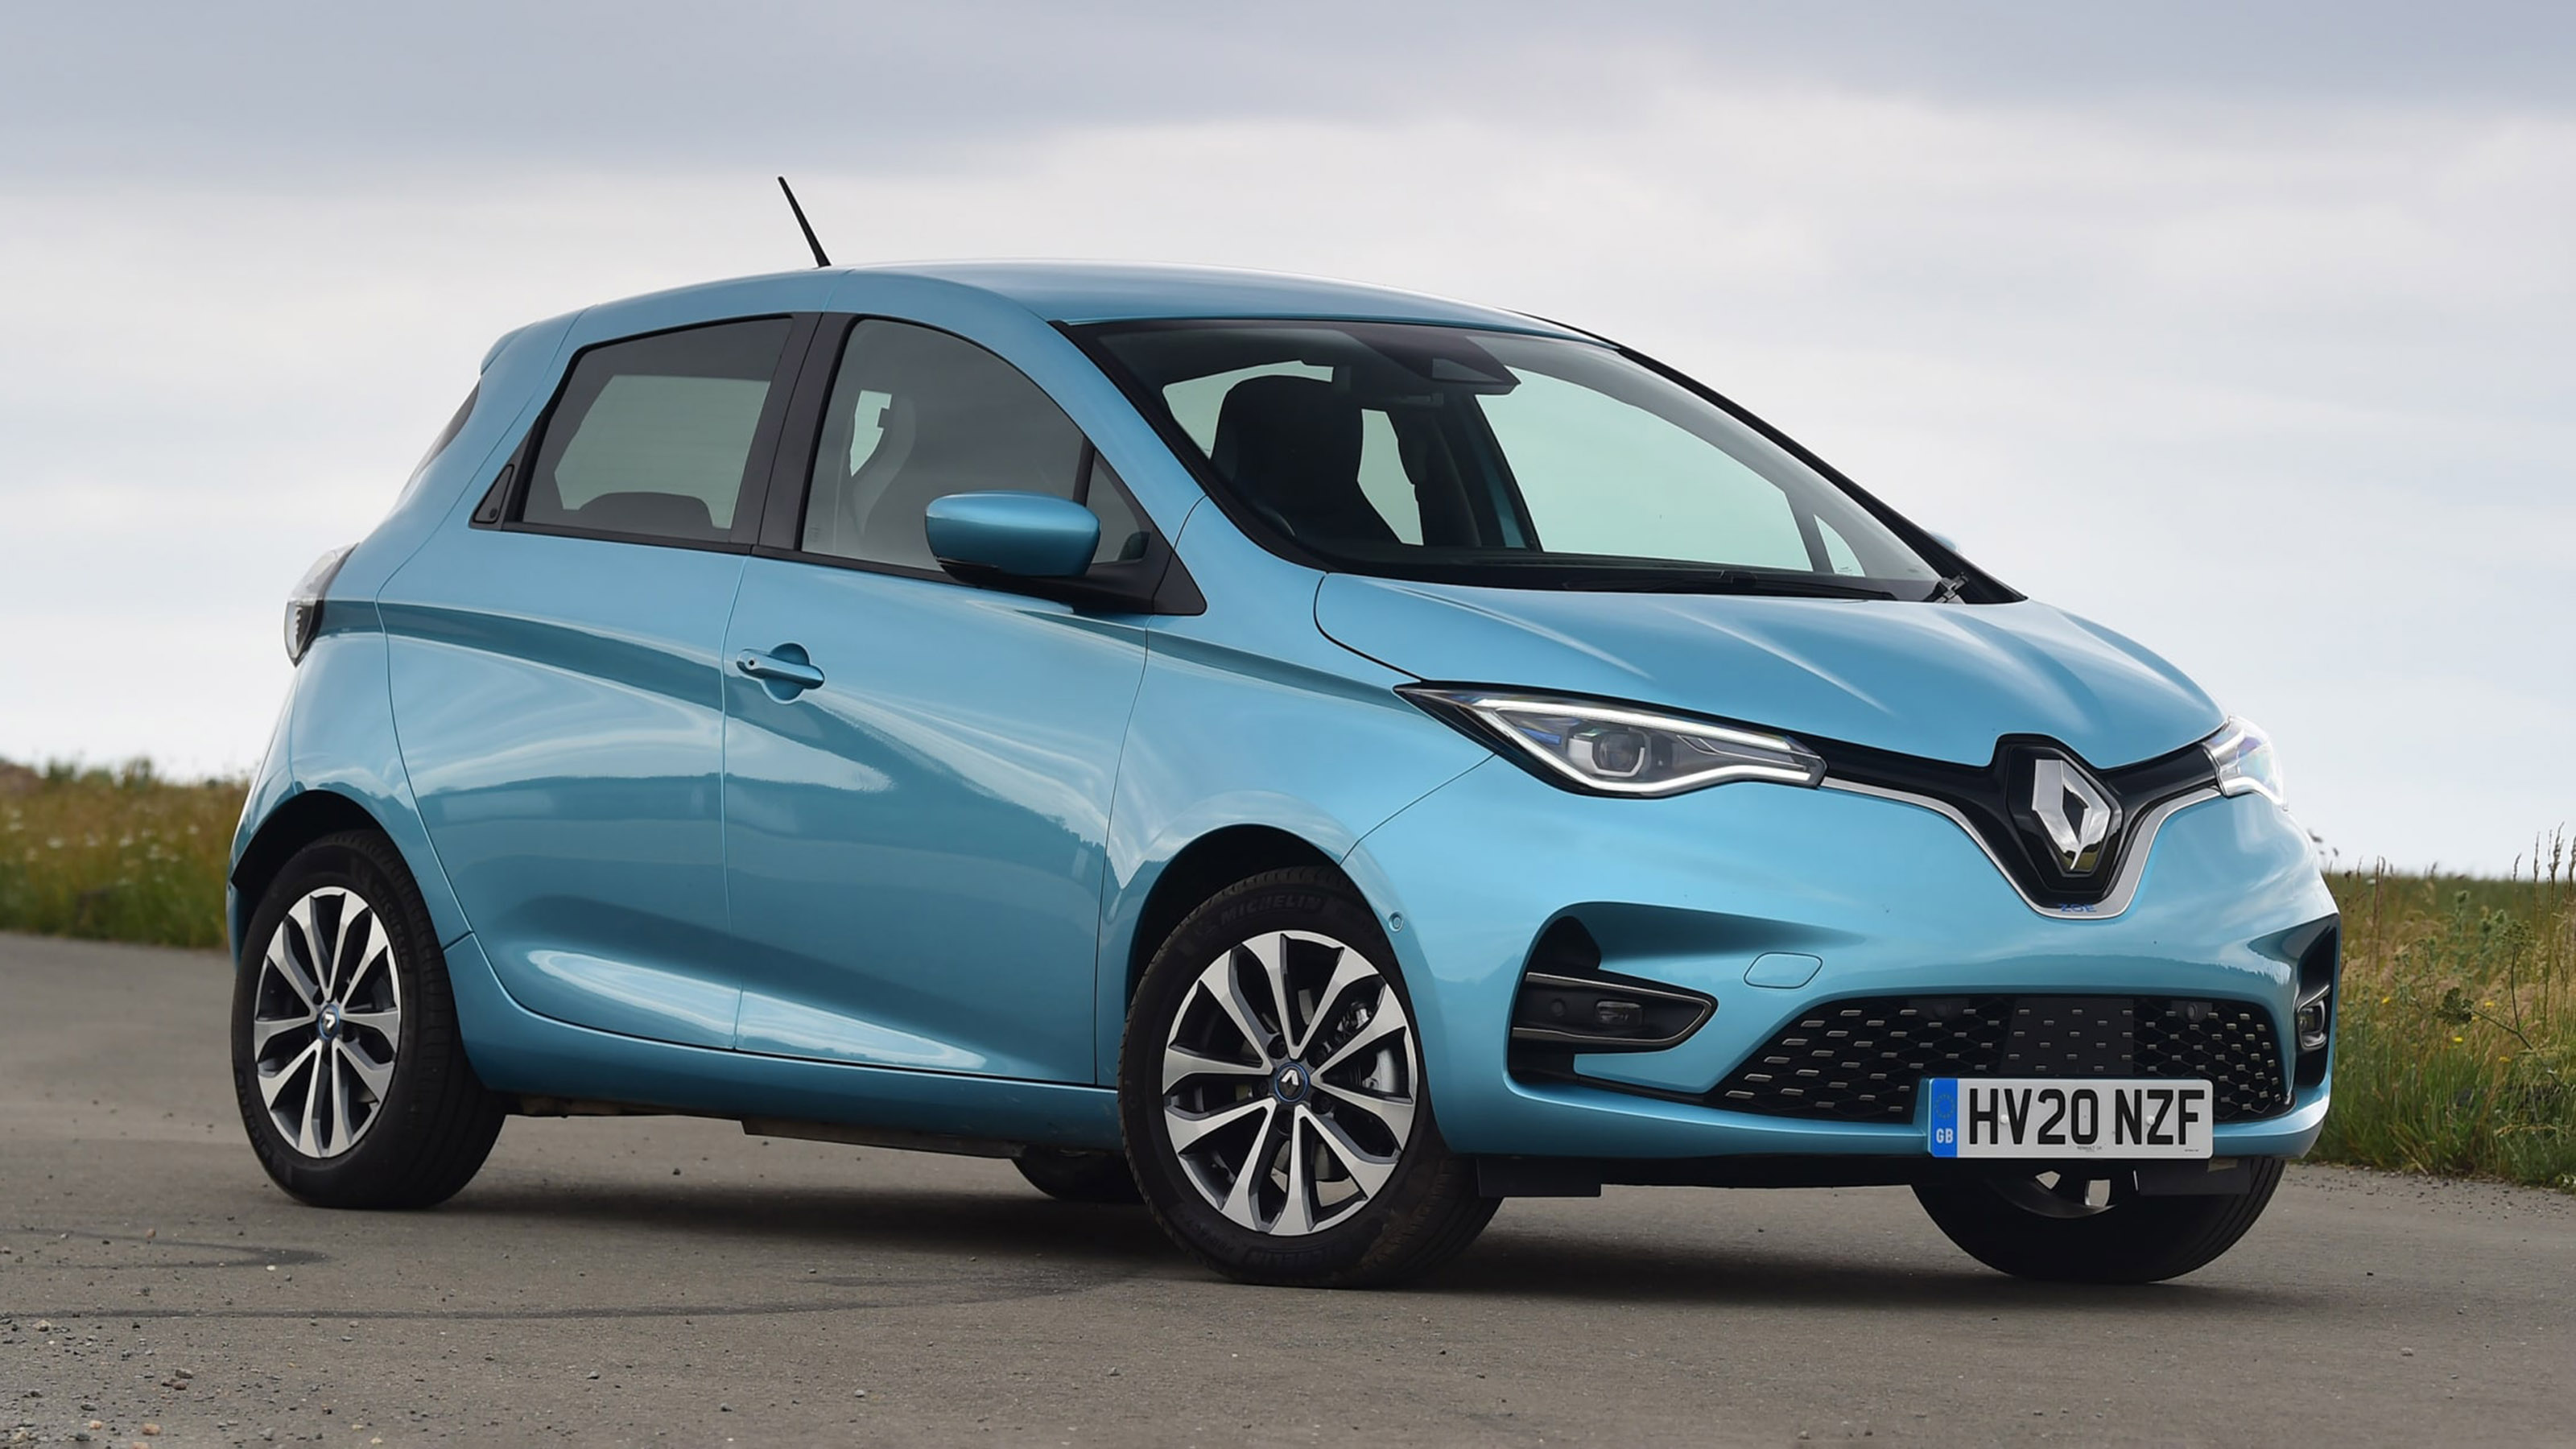 The last Renault Zoe will be manufactured on March 30 - ArenaEV